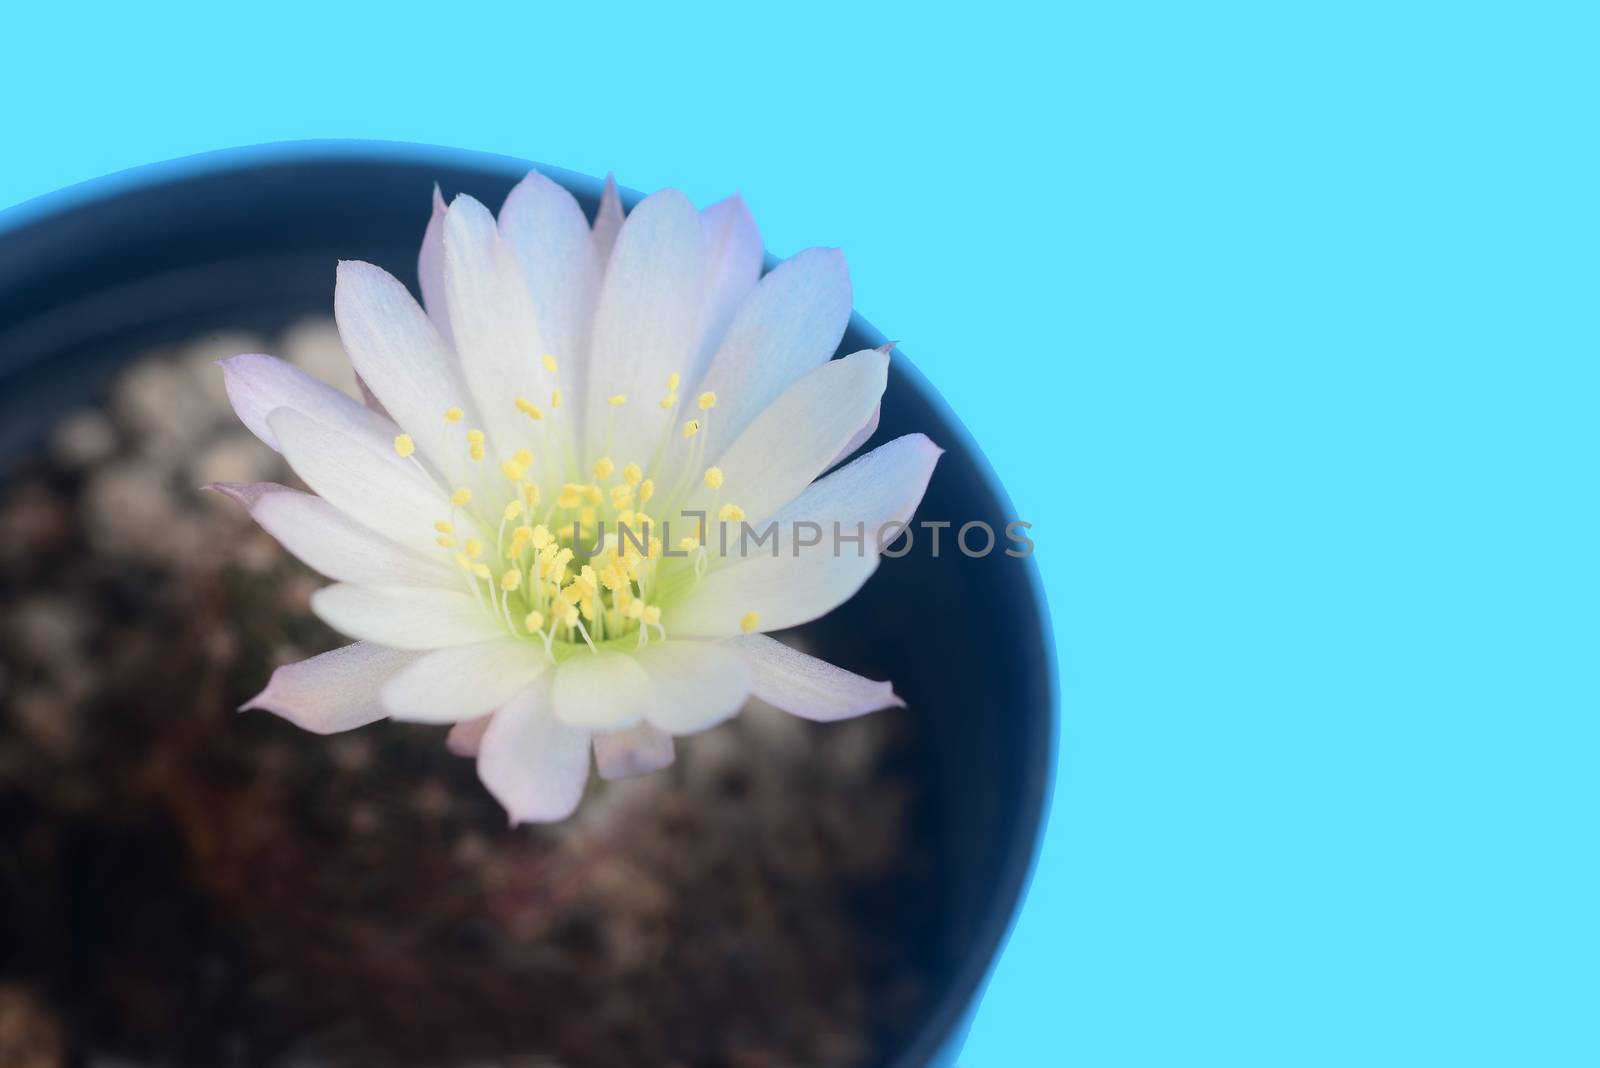 Blooming white  flower of Lobivia cactus on  blue background with copy space for text